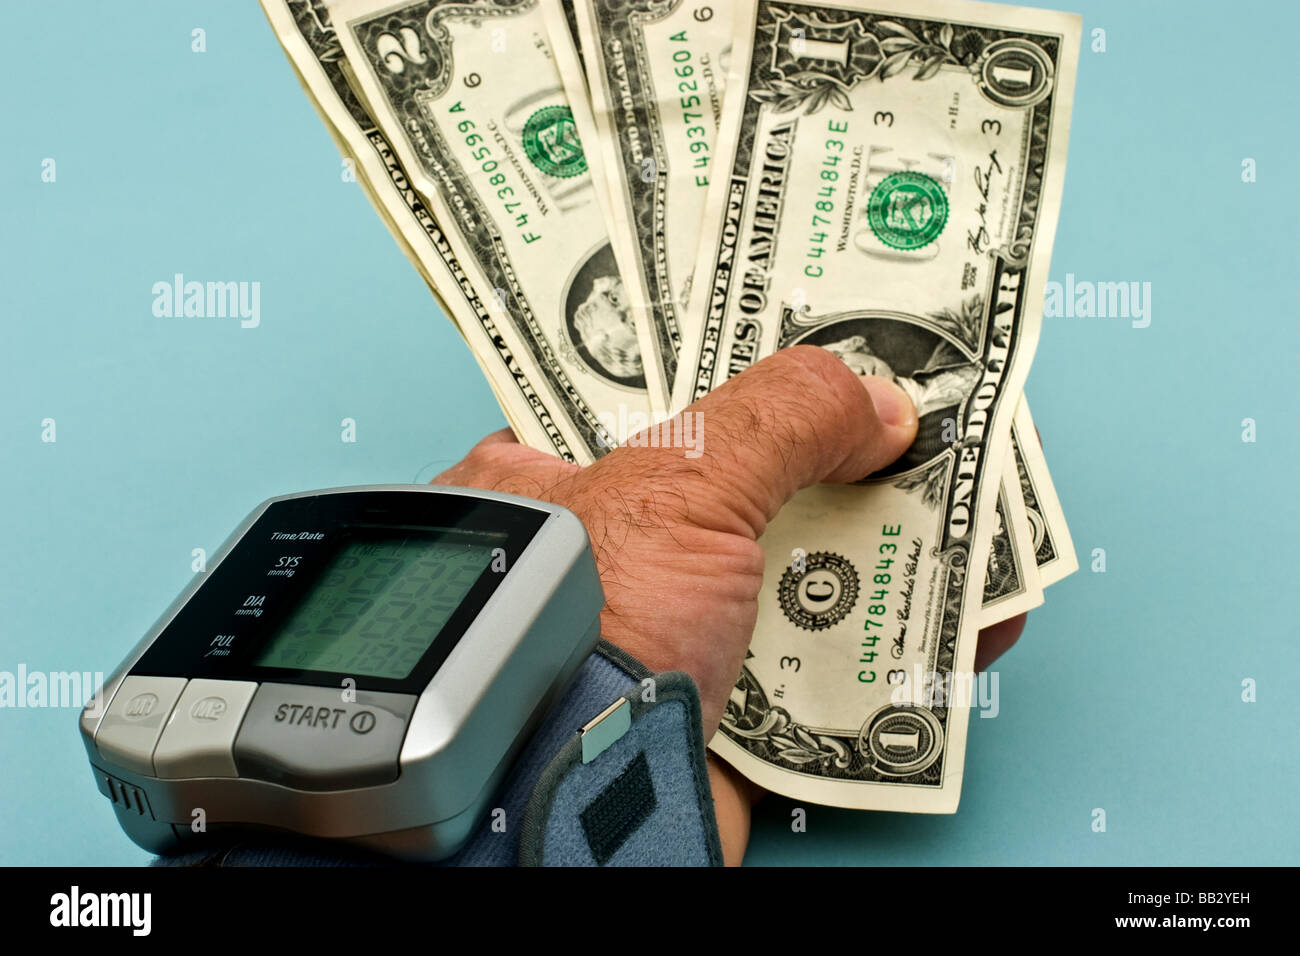 Persons hand holding dollar bills with a blood pressure cuff on the wrist Stock Photo